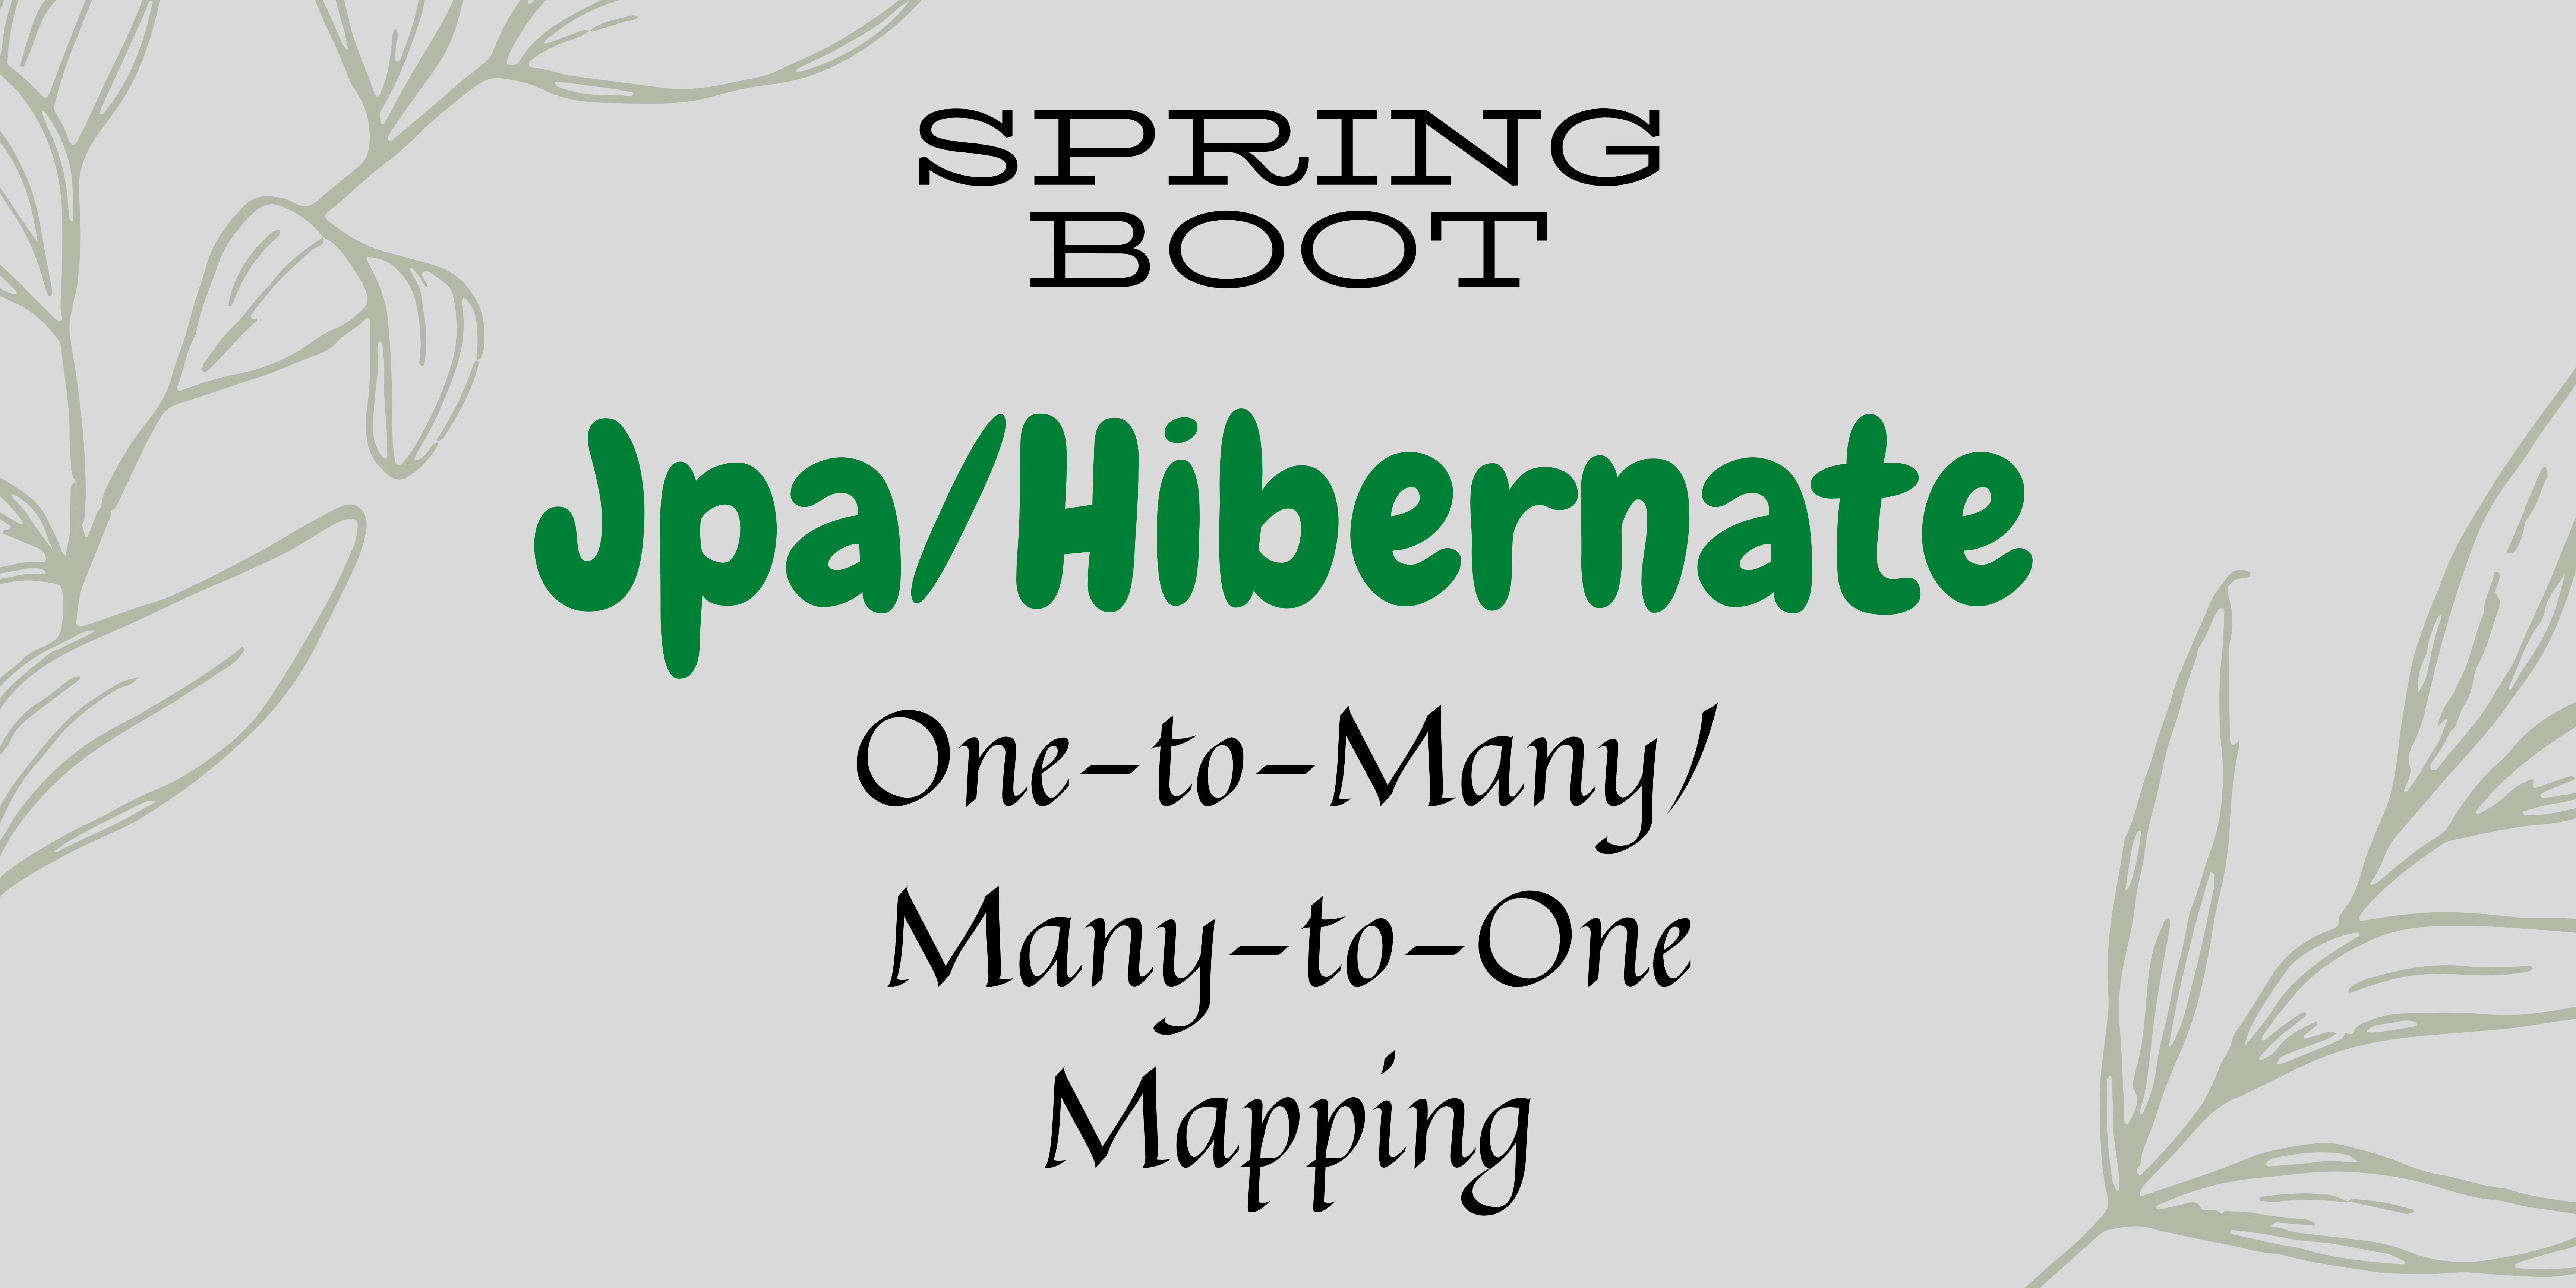 You are currently viewing JPA / Hibernate One to Many Mapping Example with Spring Boot